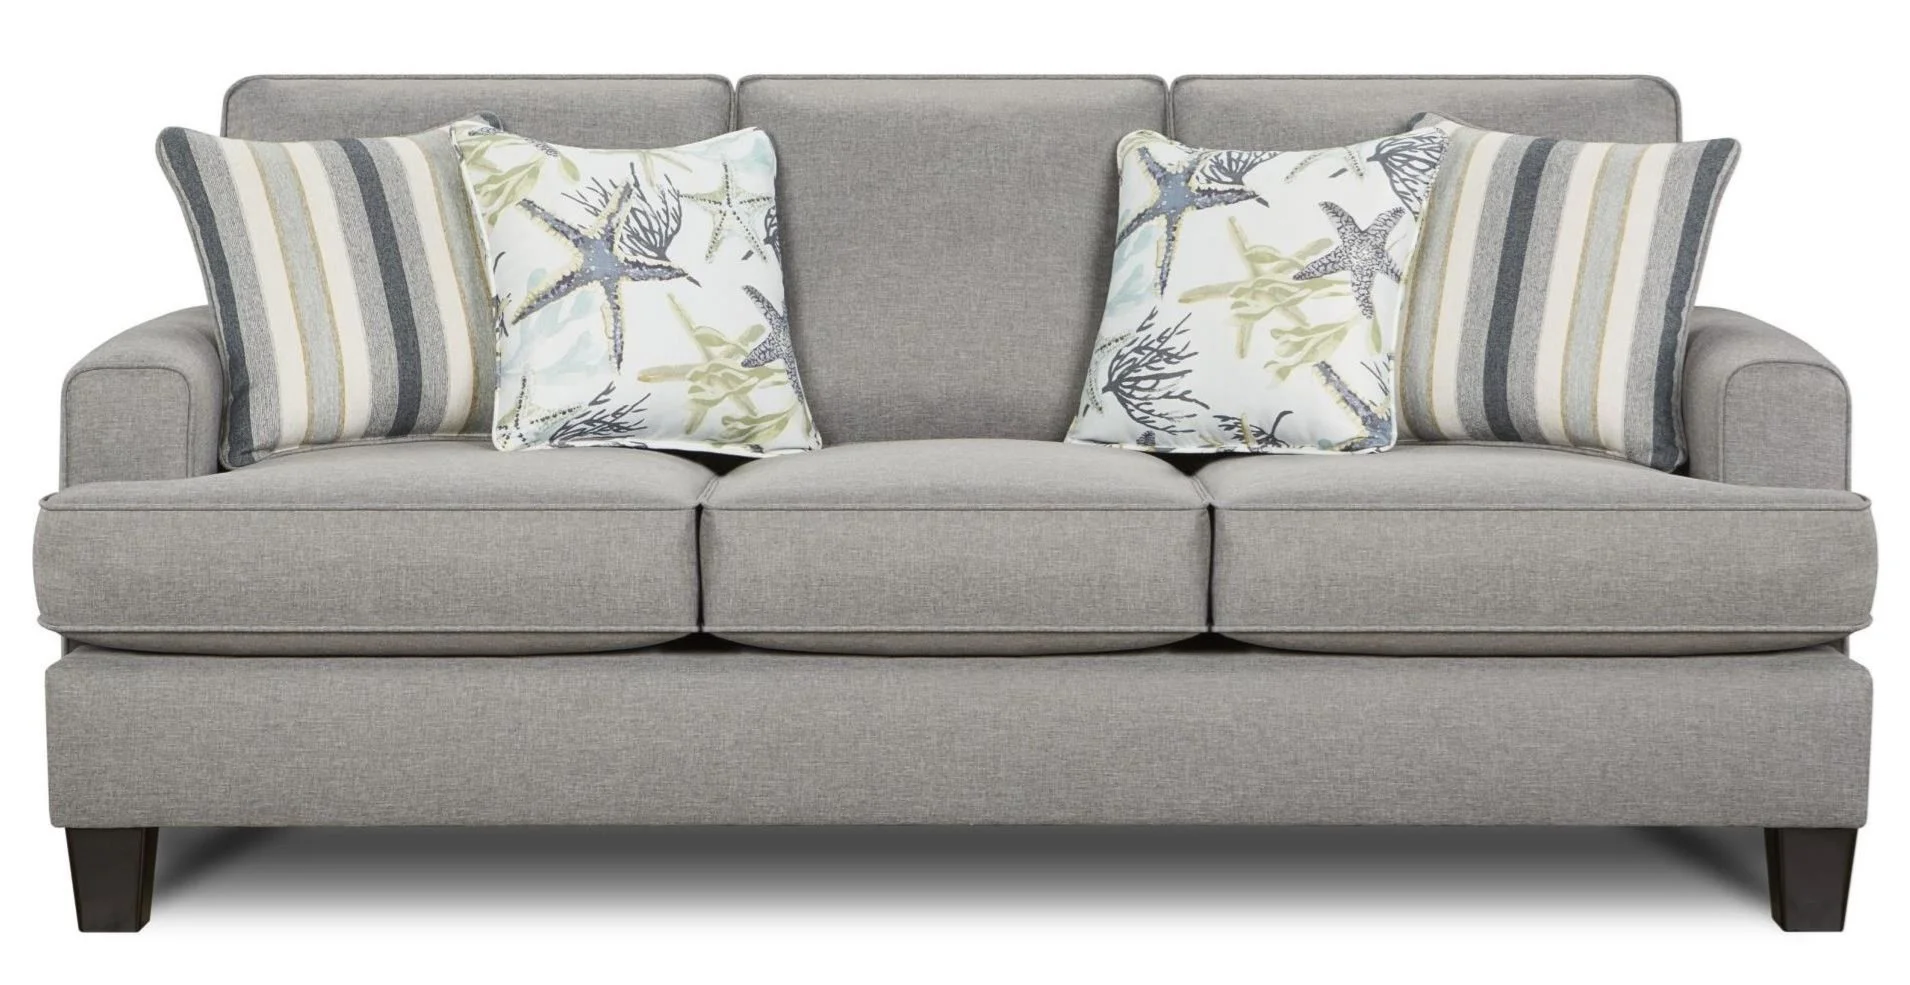 Fusion Furniture Jitter Bug Flax Living Room Group